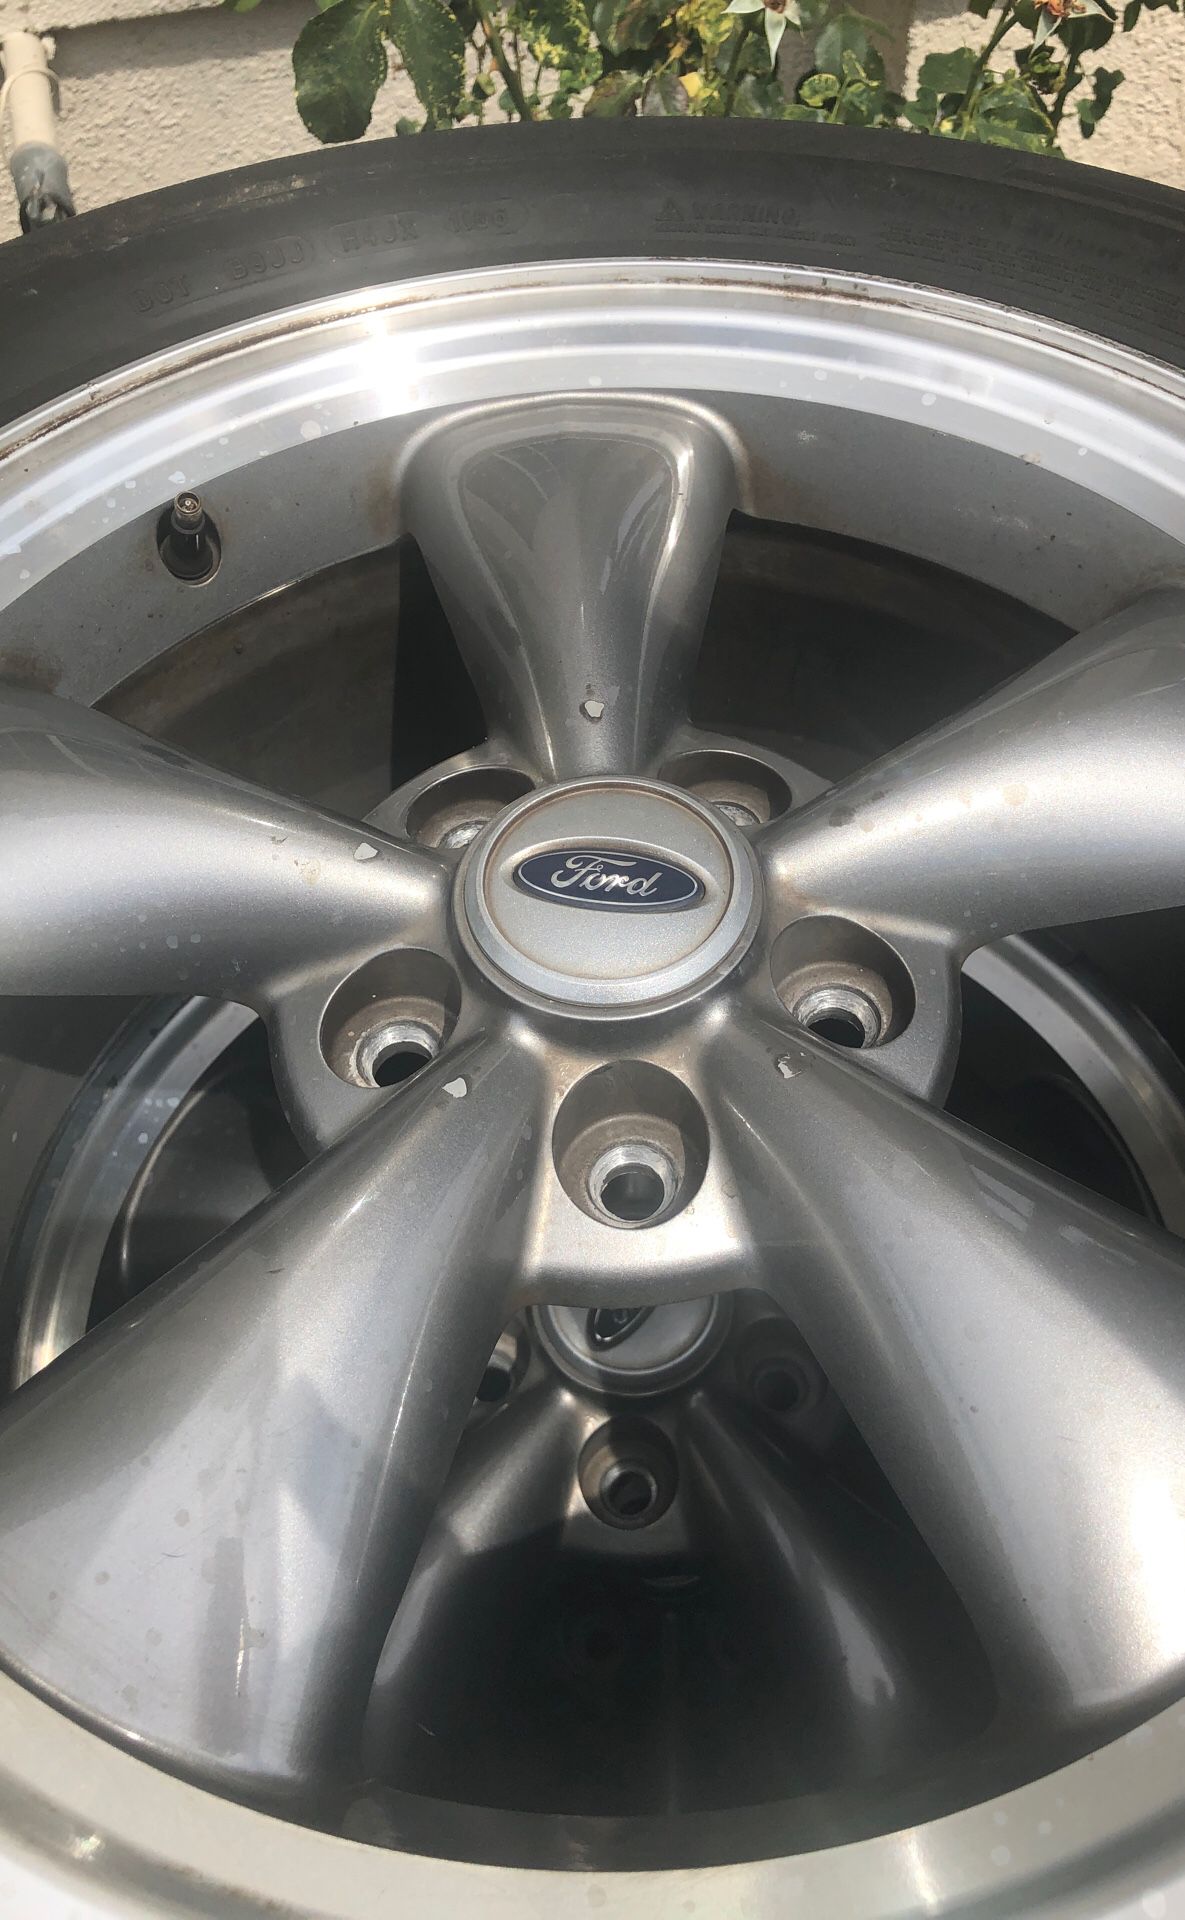 Rims of a Ford Mustang 2006